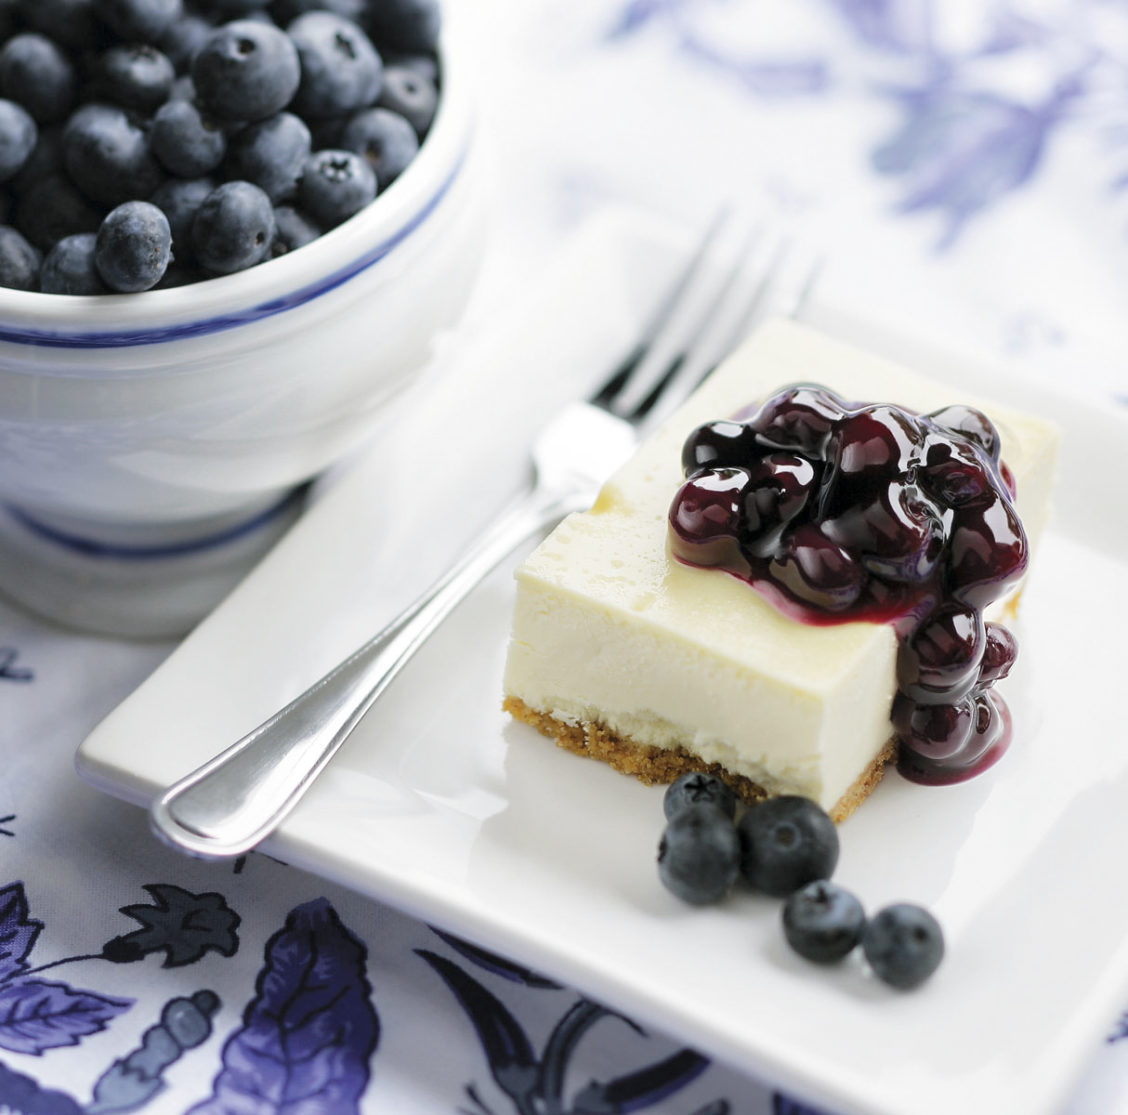 Photograph of cheesecake dessert with fresh blueberries